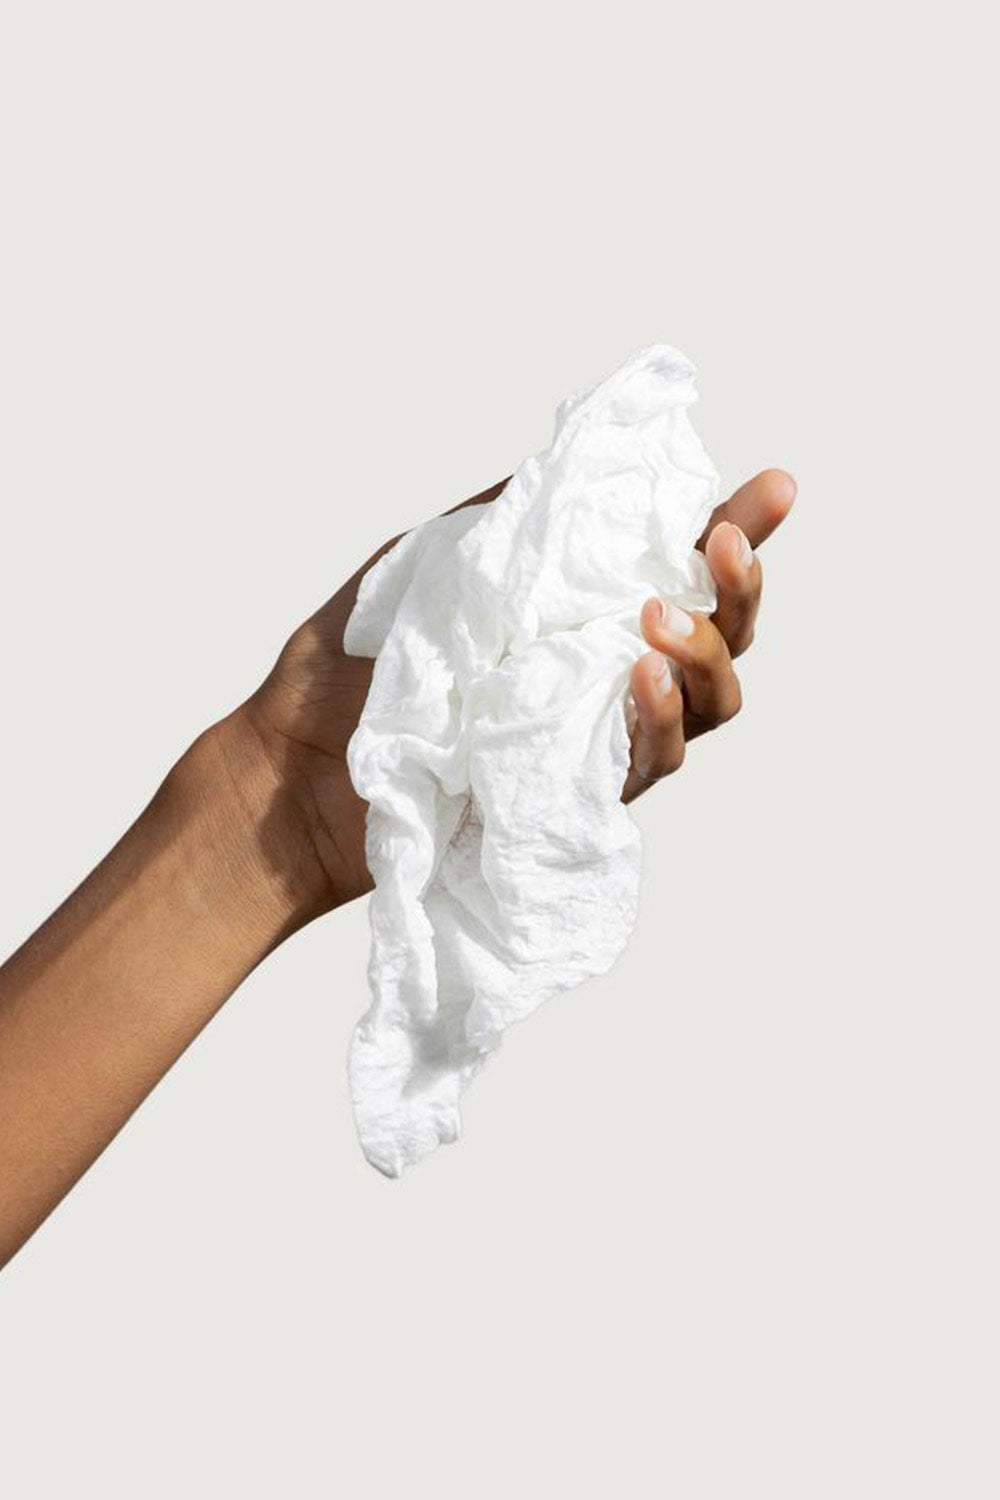 WIPE - COMPOSTABLE COMPRESSED TOWELS